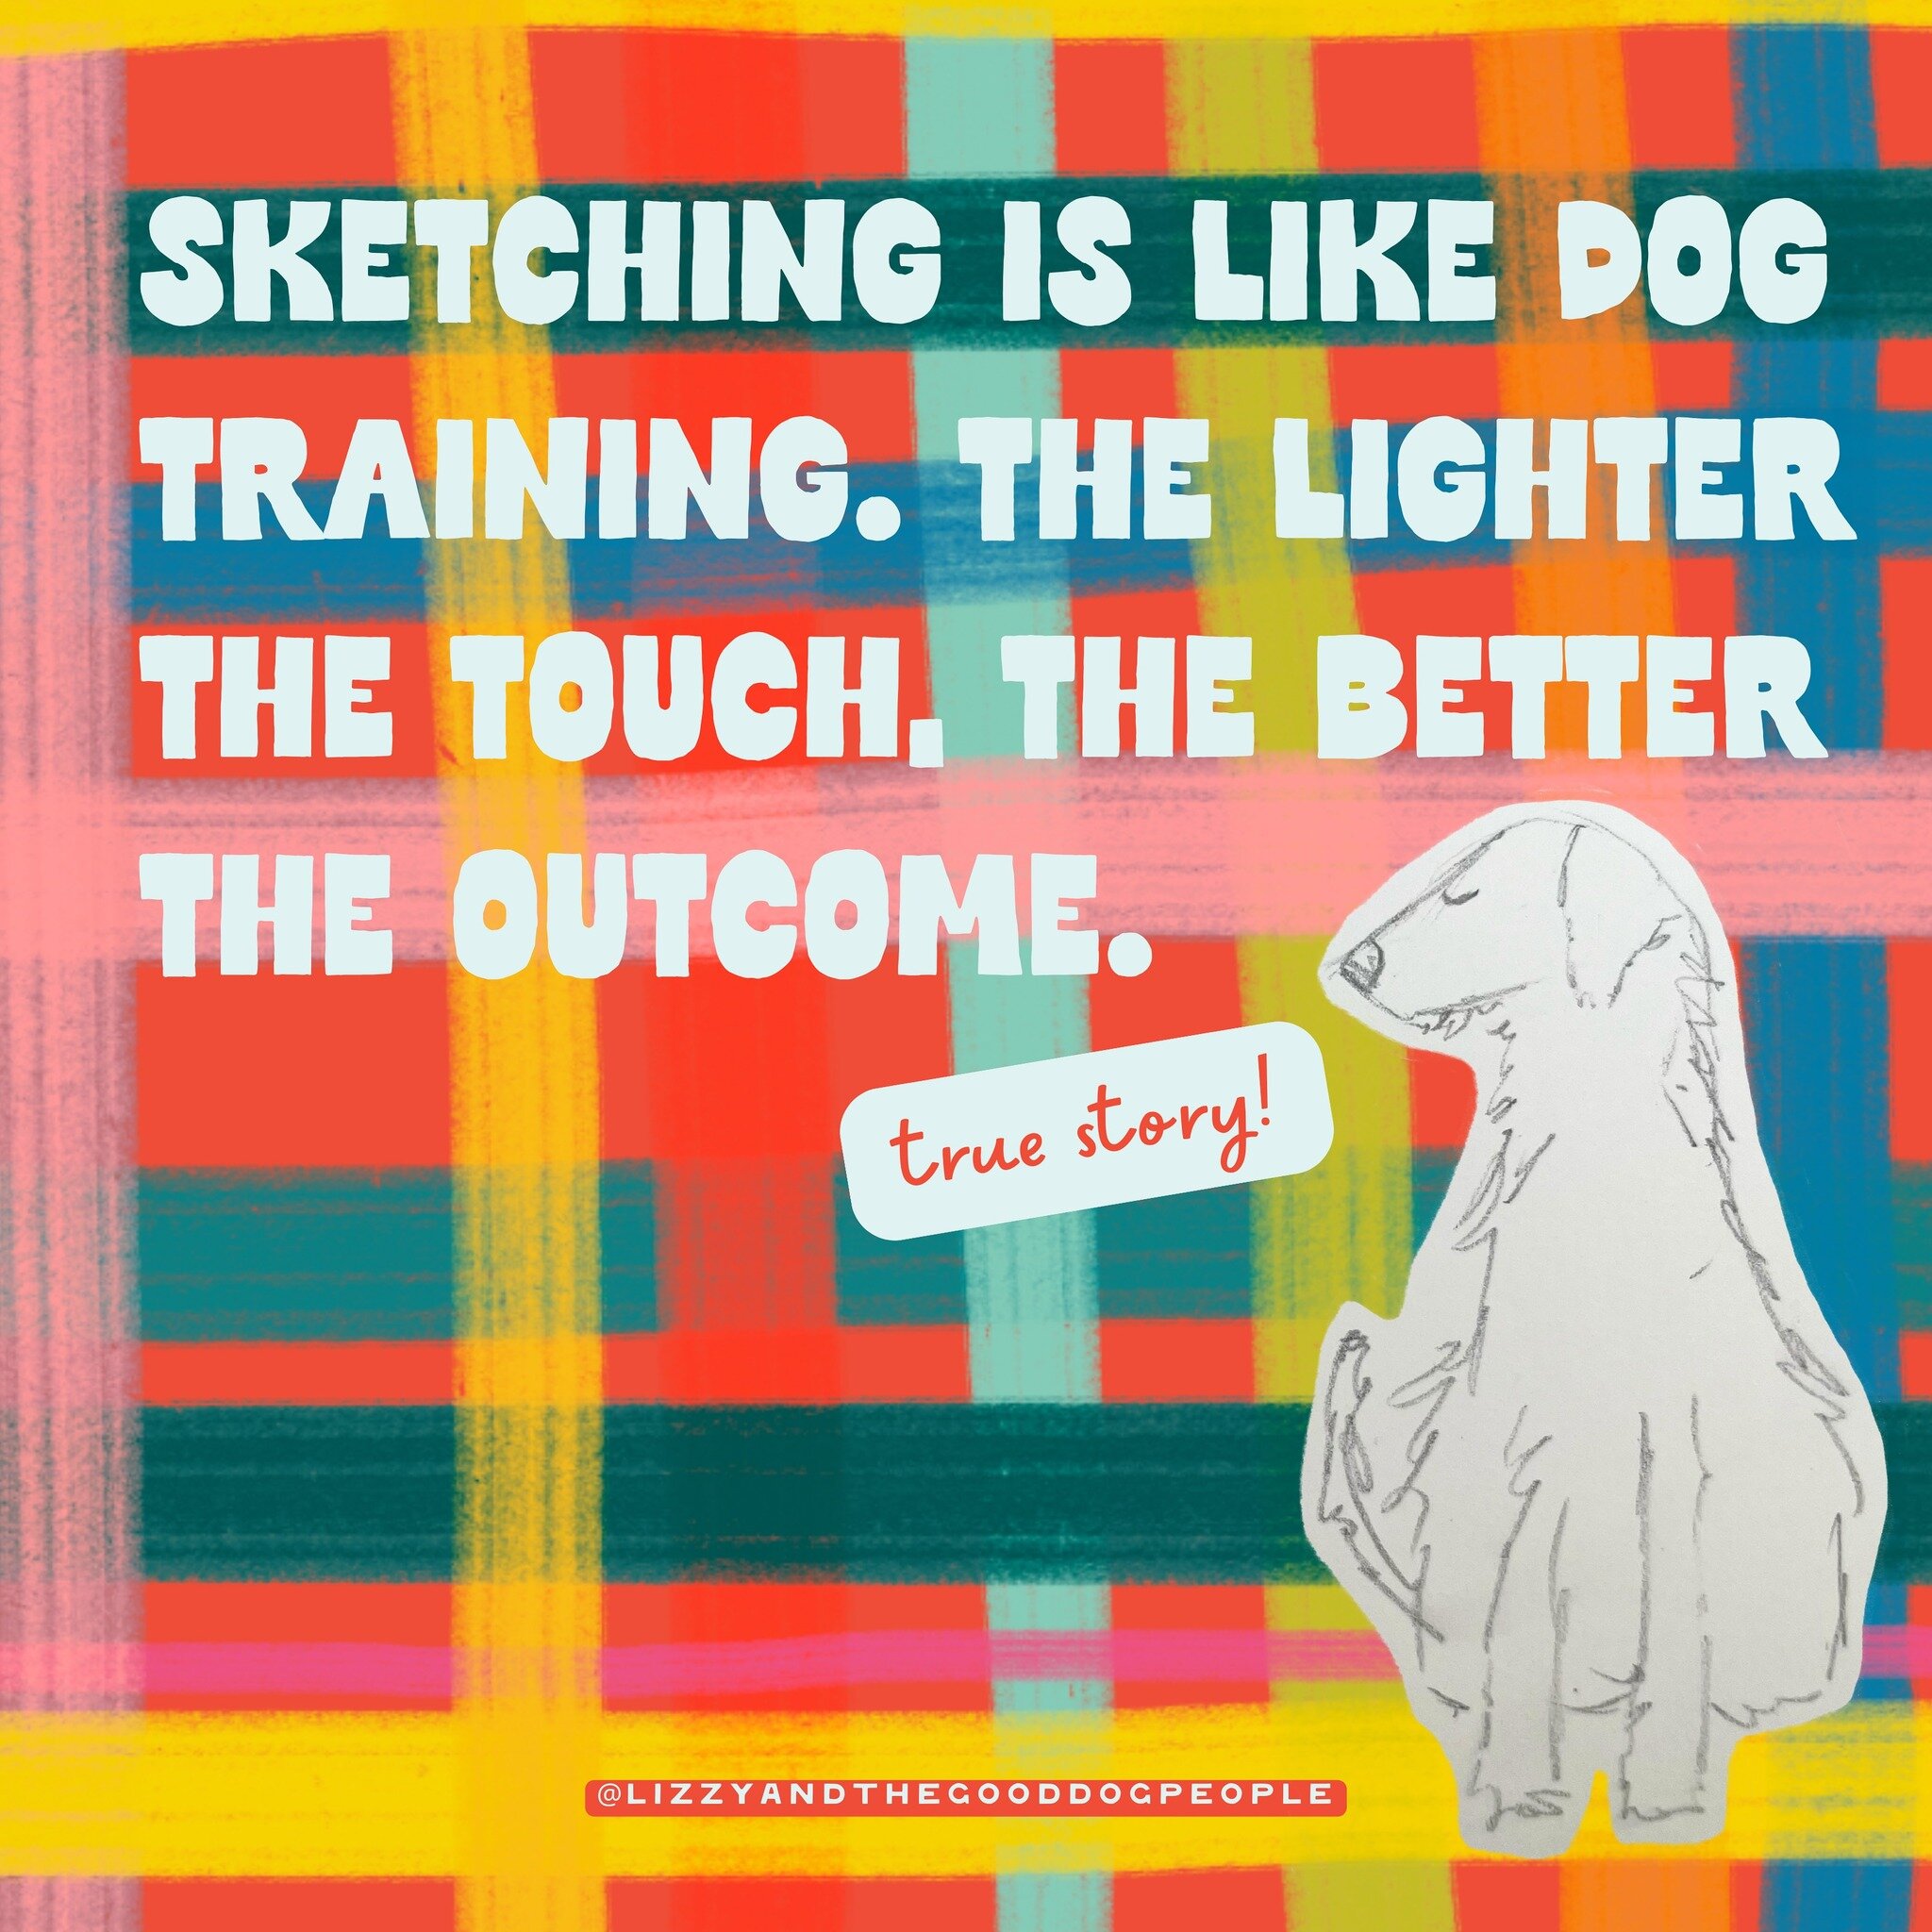 Sketching is like dog training. The softer the touch, the better the outcome. 

#dogsofinstagram #dogtrainer #sketch